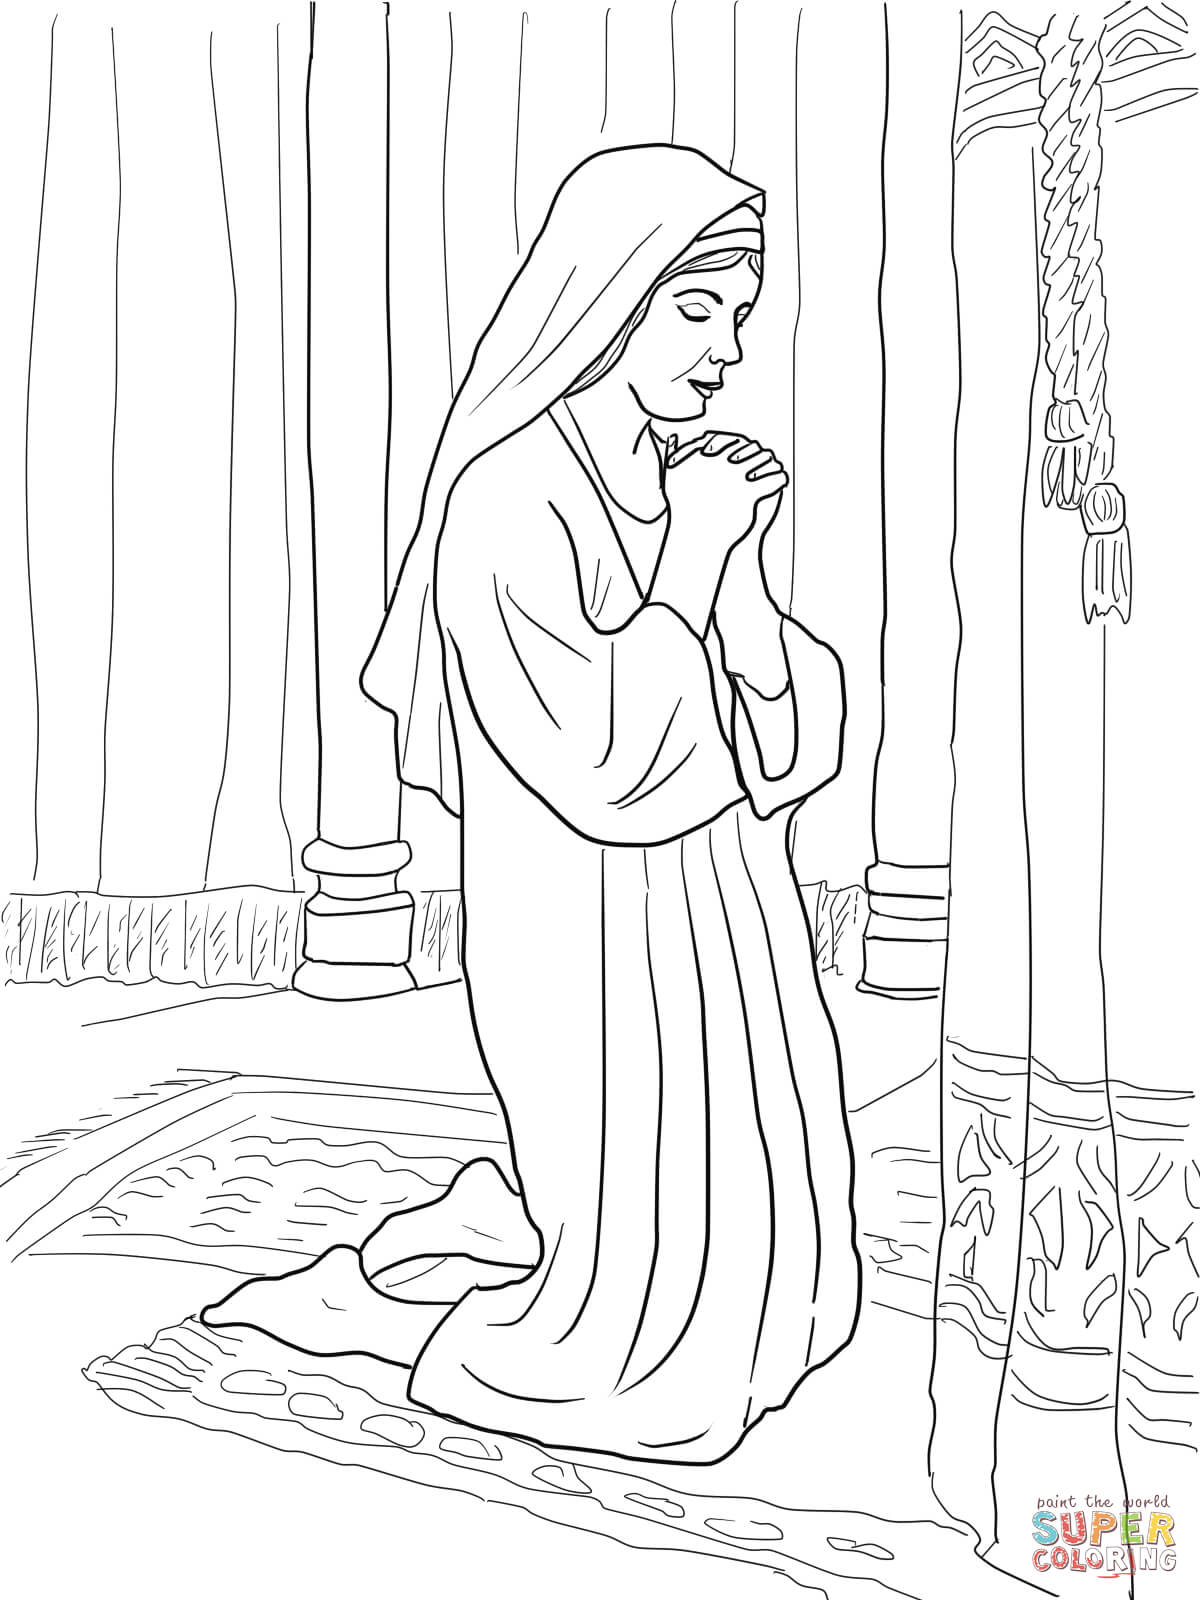 Hannah Prays for a Son coloring page | Free Printable Coloring Pages